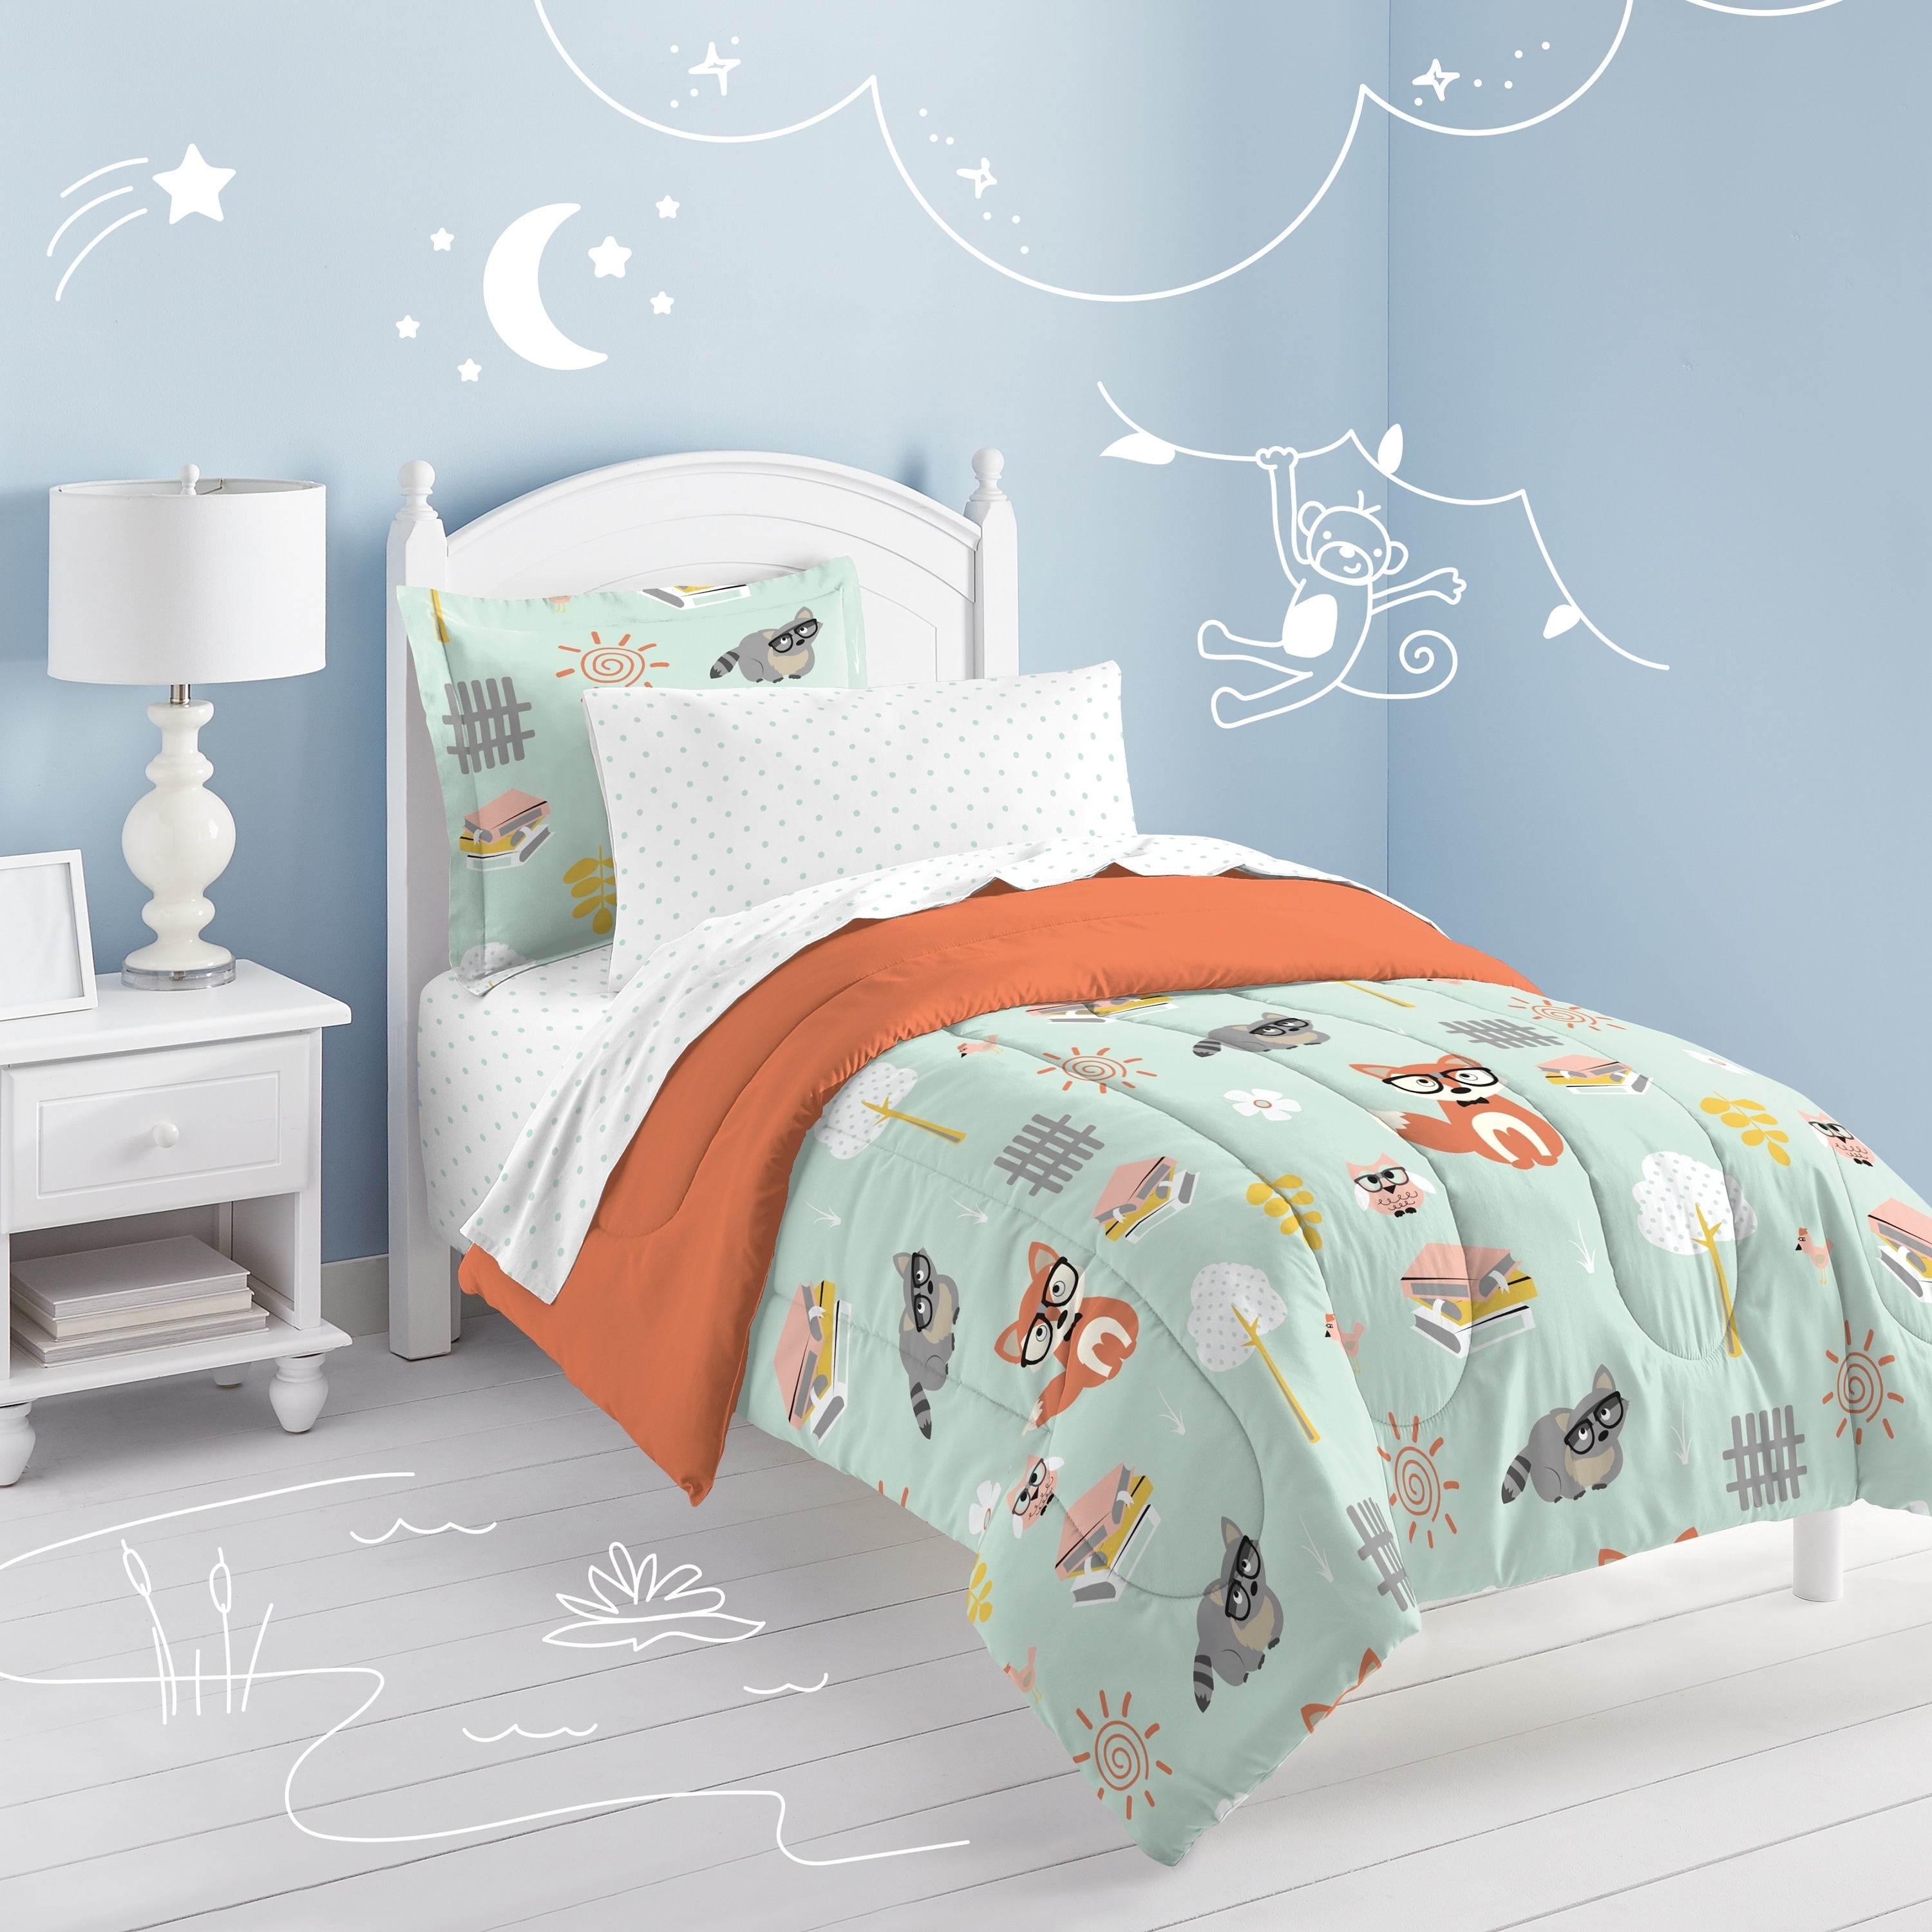 Shop Dream Factory Woodland Friends Twin Bed In A Bag With Sheet